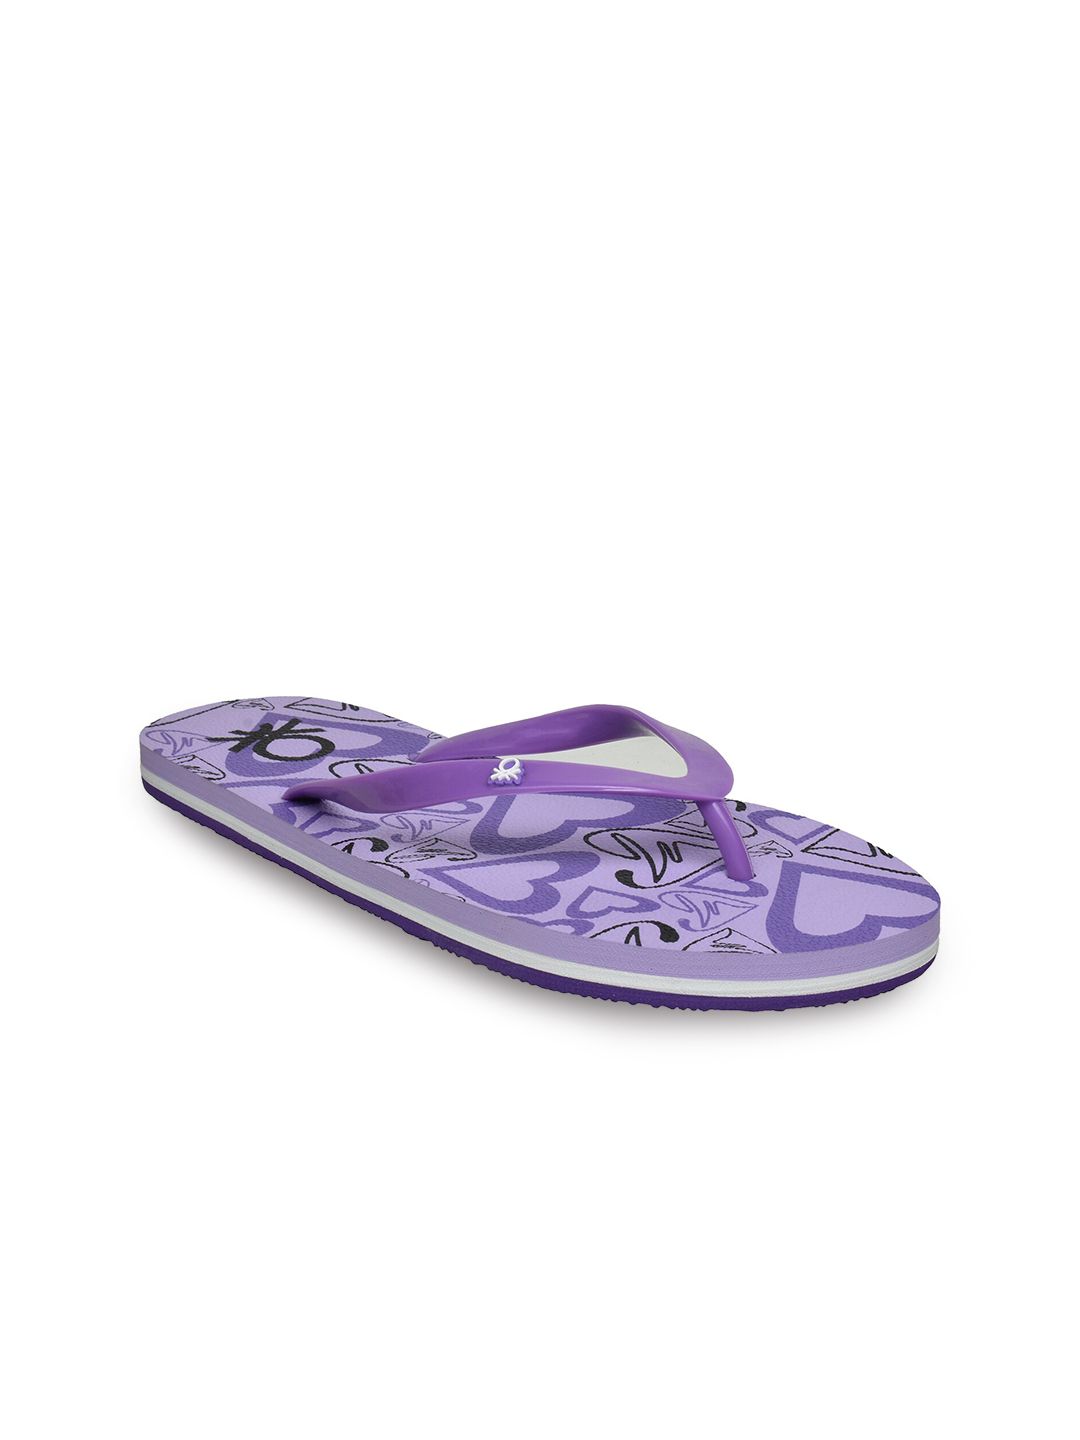 United Colors of Benetton Women Purple Printed Thong Flip-Flops Price in India